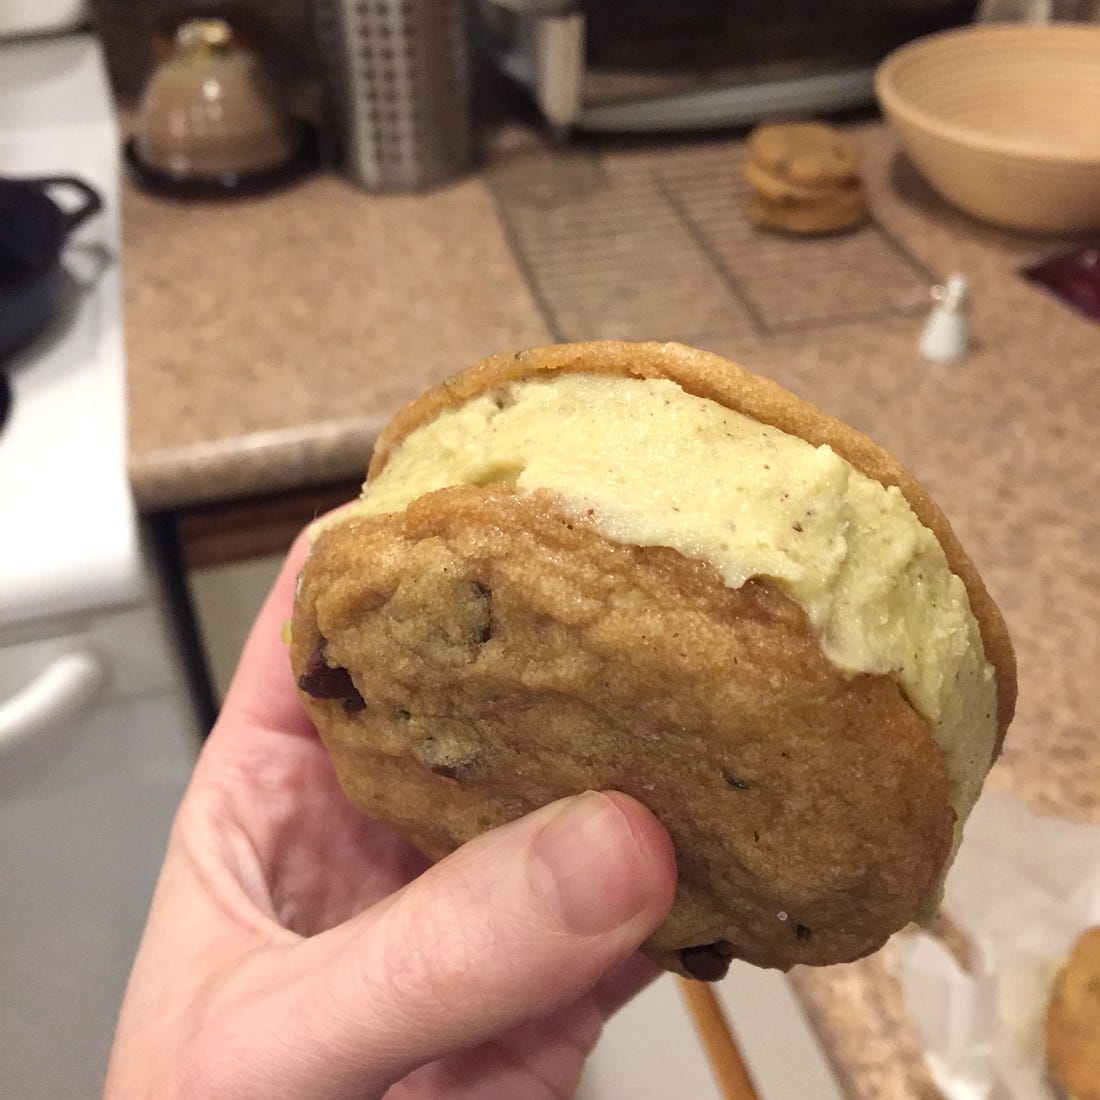 My hand holding the ice cream sandwich described above. Green pistachio ice cream is neatly spread between two of the cookies. In the background, a small stack of the cookies is visible on the counter next to the stove.